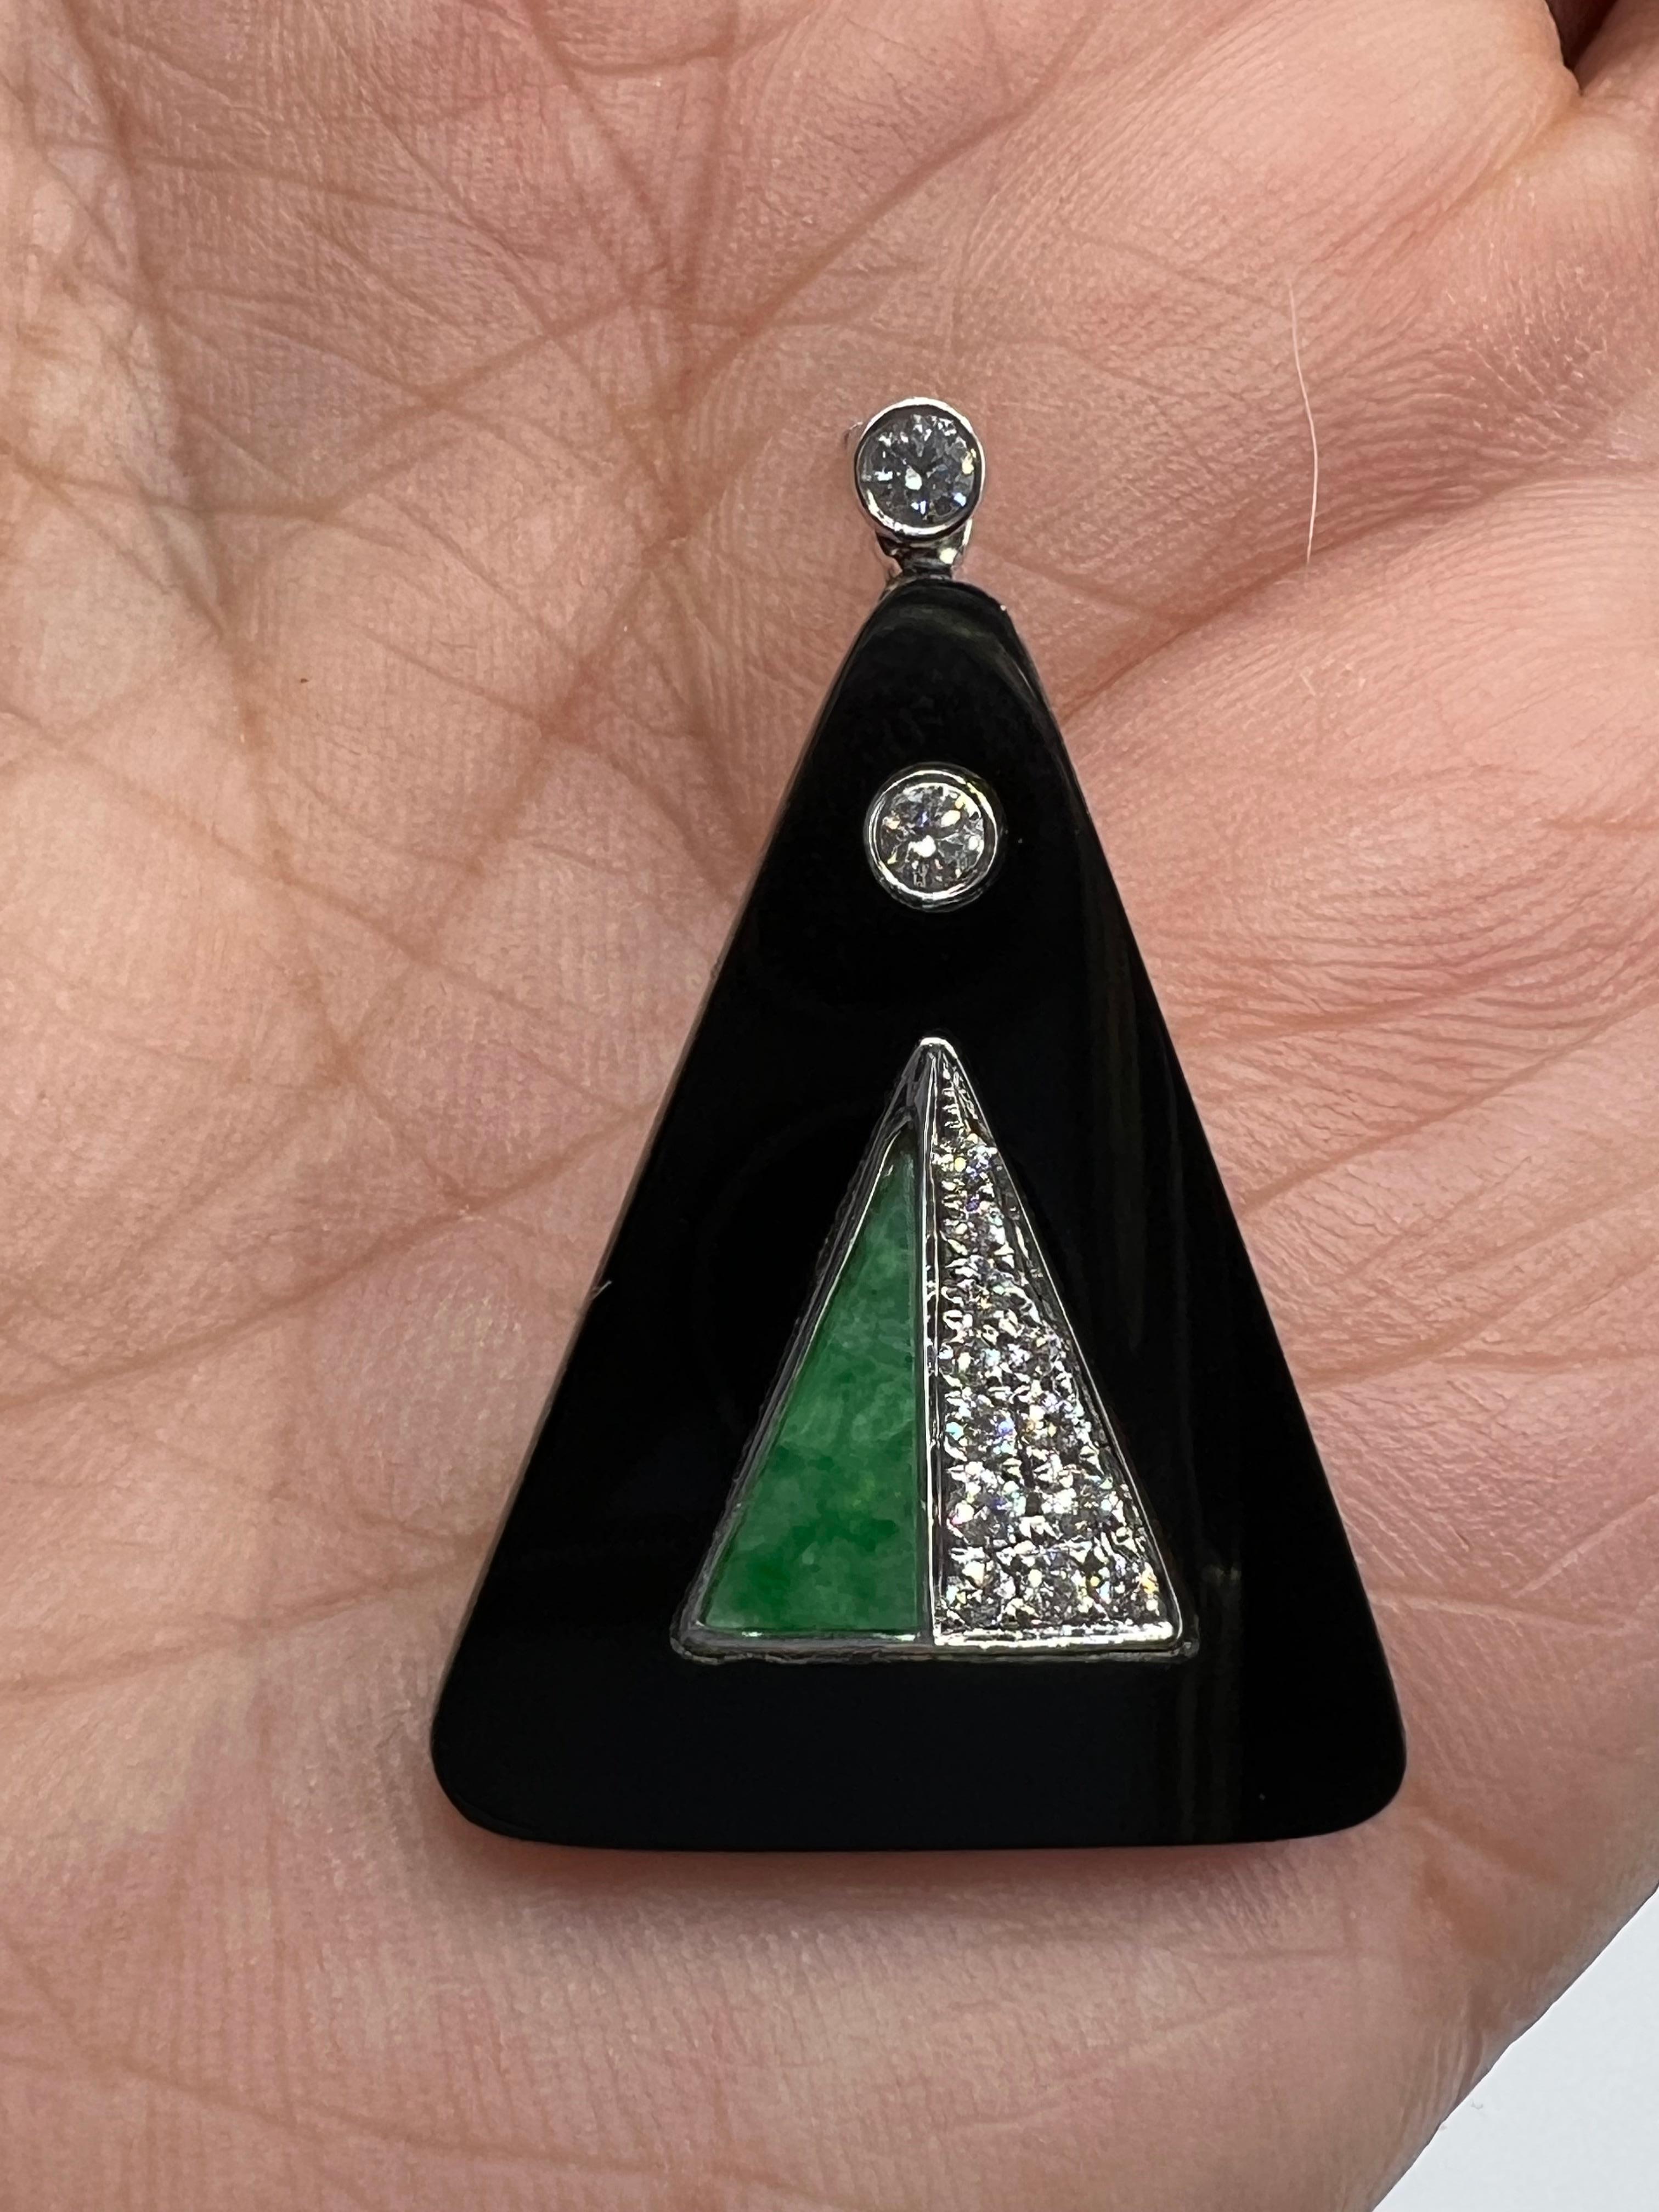 18ct gold earrings set with diamonds, jade and black onyx.
for pierced ears,
total weight: 6.34 grams
height: 3cm
width at the base of the triangle: a base of